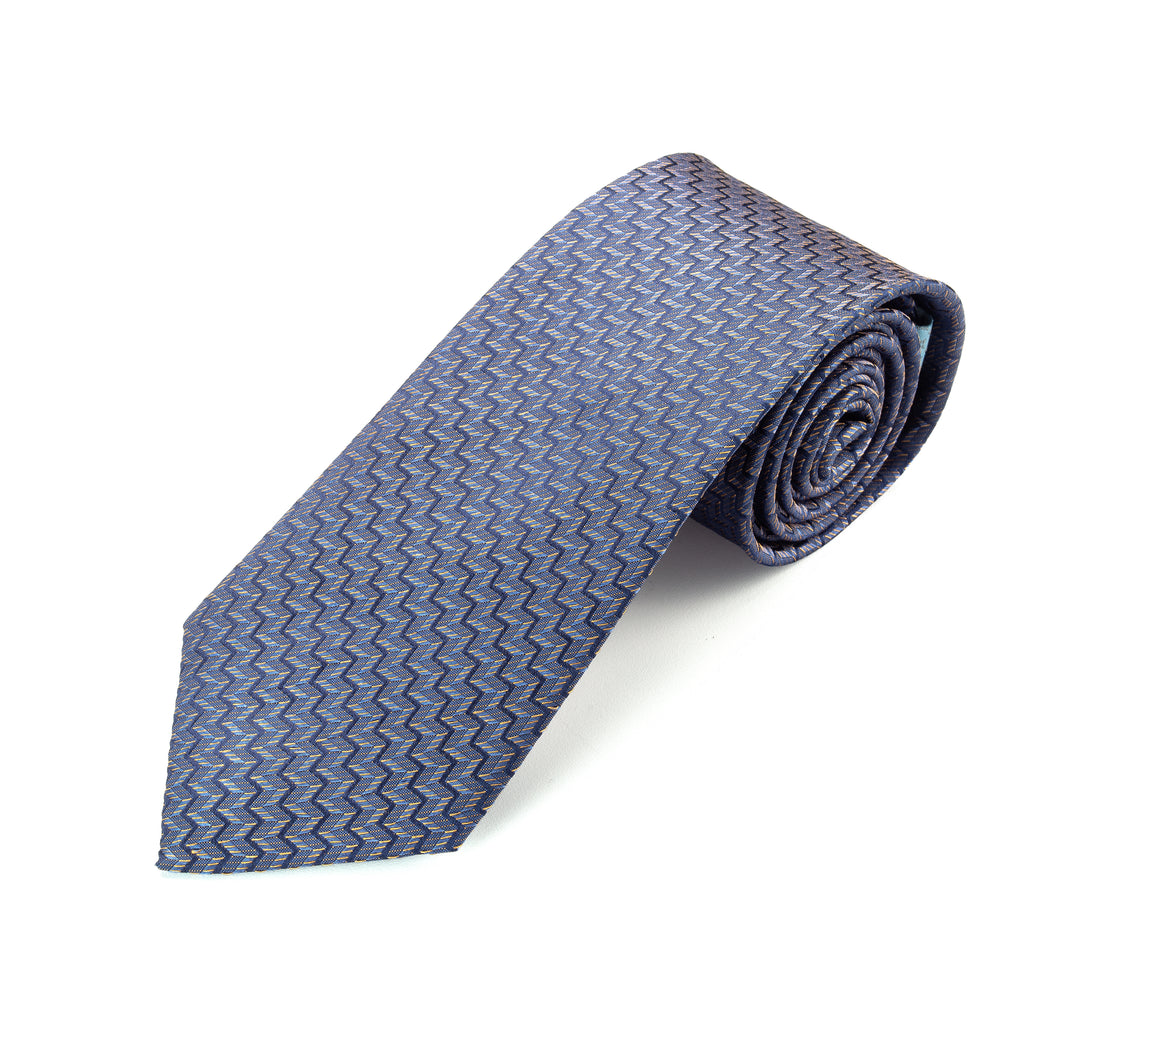 A symbol of professionalism, this tie adds a touch of refinement | 1864